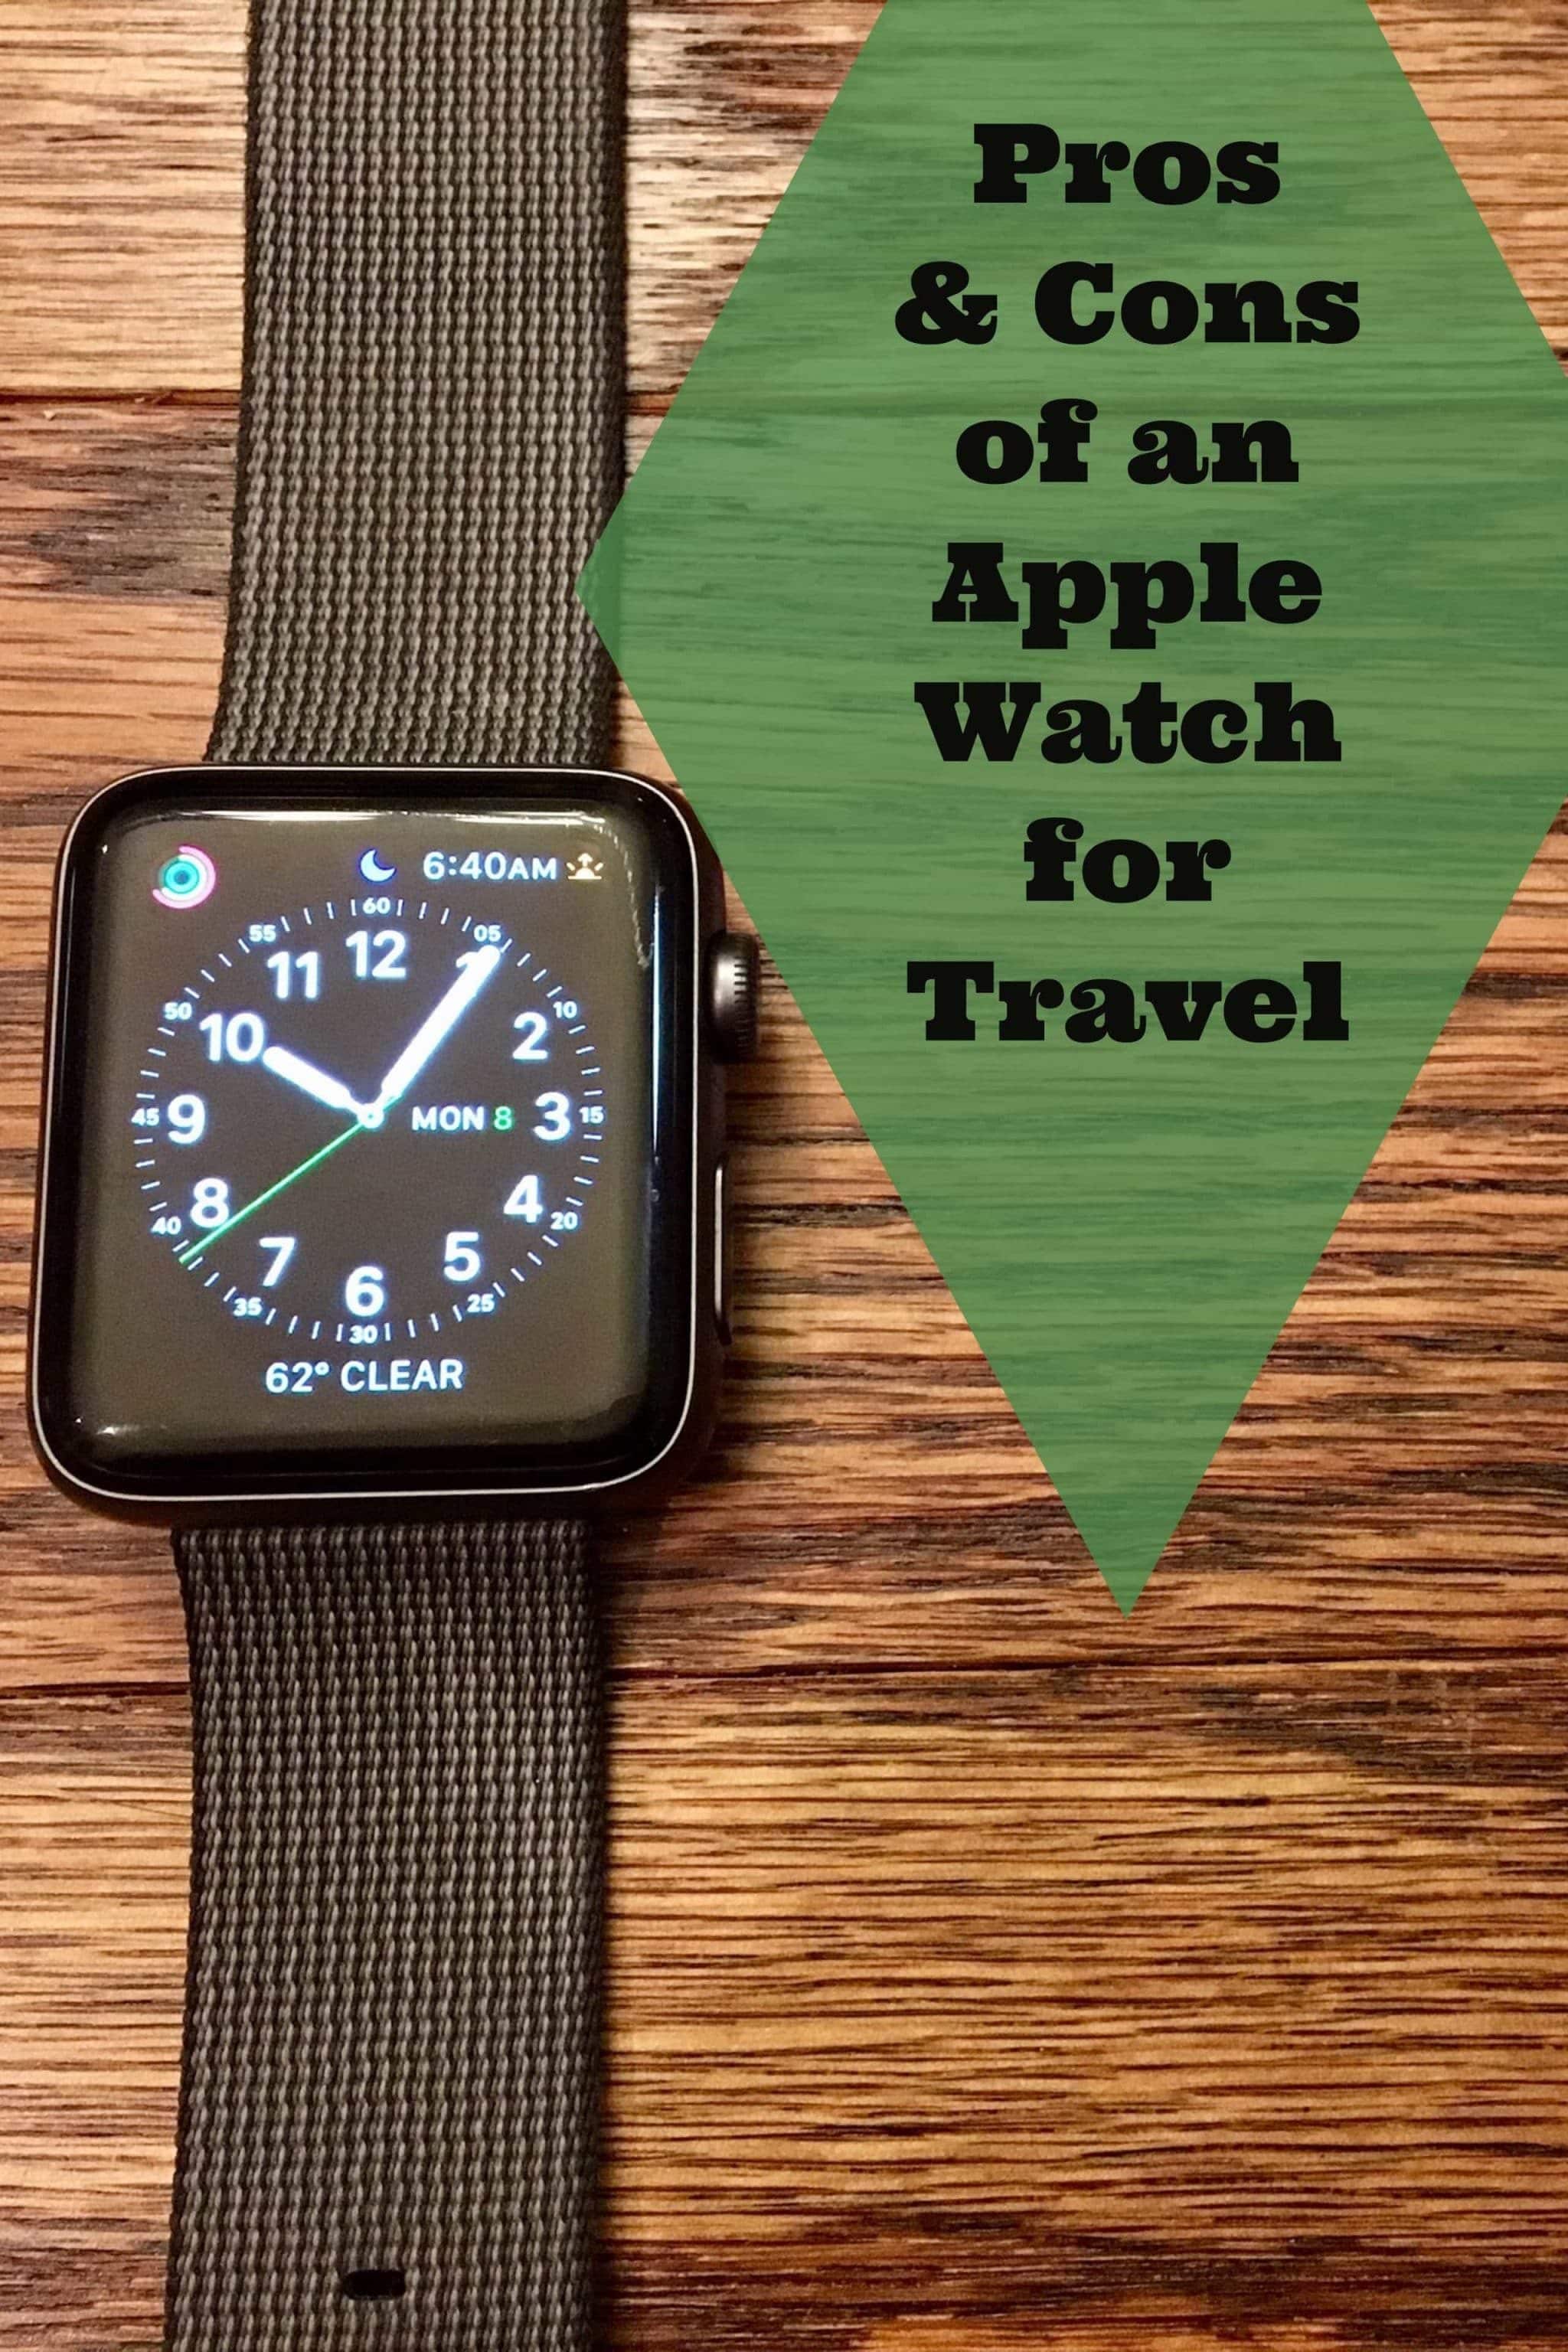 The Apple Watch is an outstanding fitness tracker and iPhone companion, but how does it stack up for travel, both domestically and internationally?